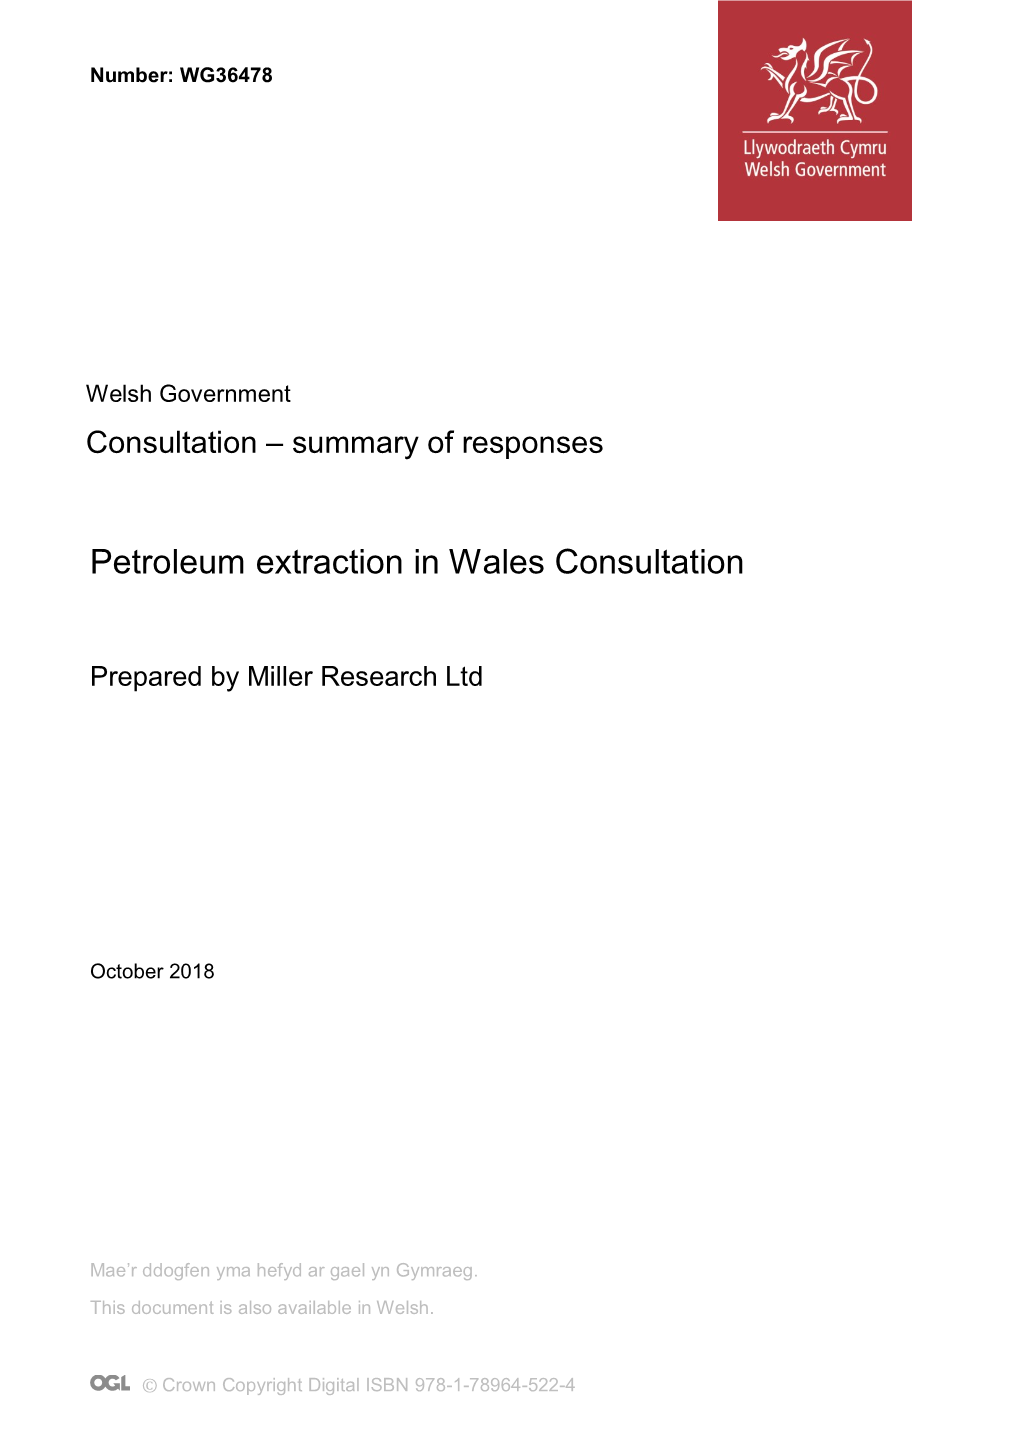 Petroleum Extraction in Wales Consultation